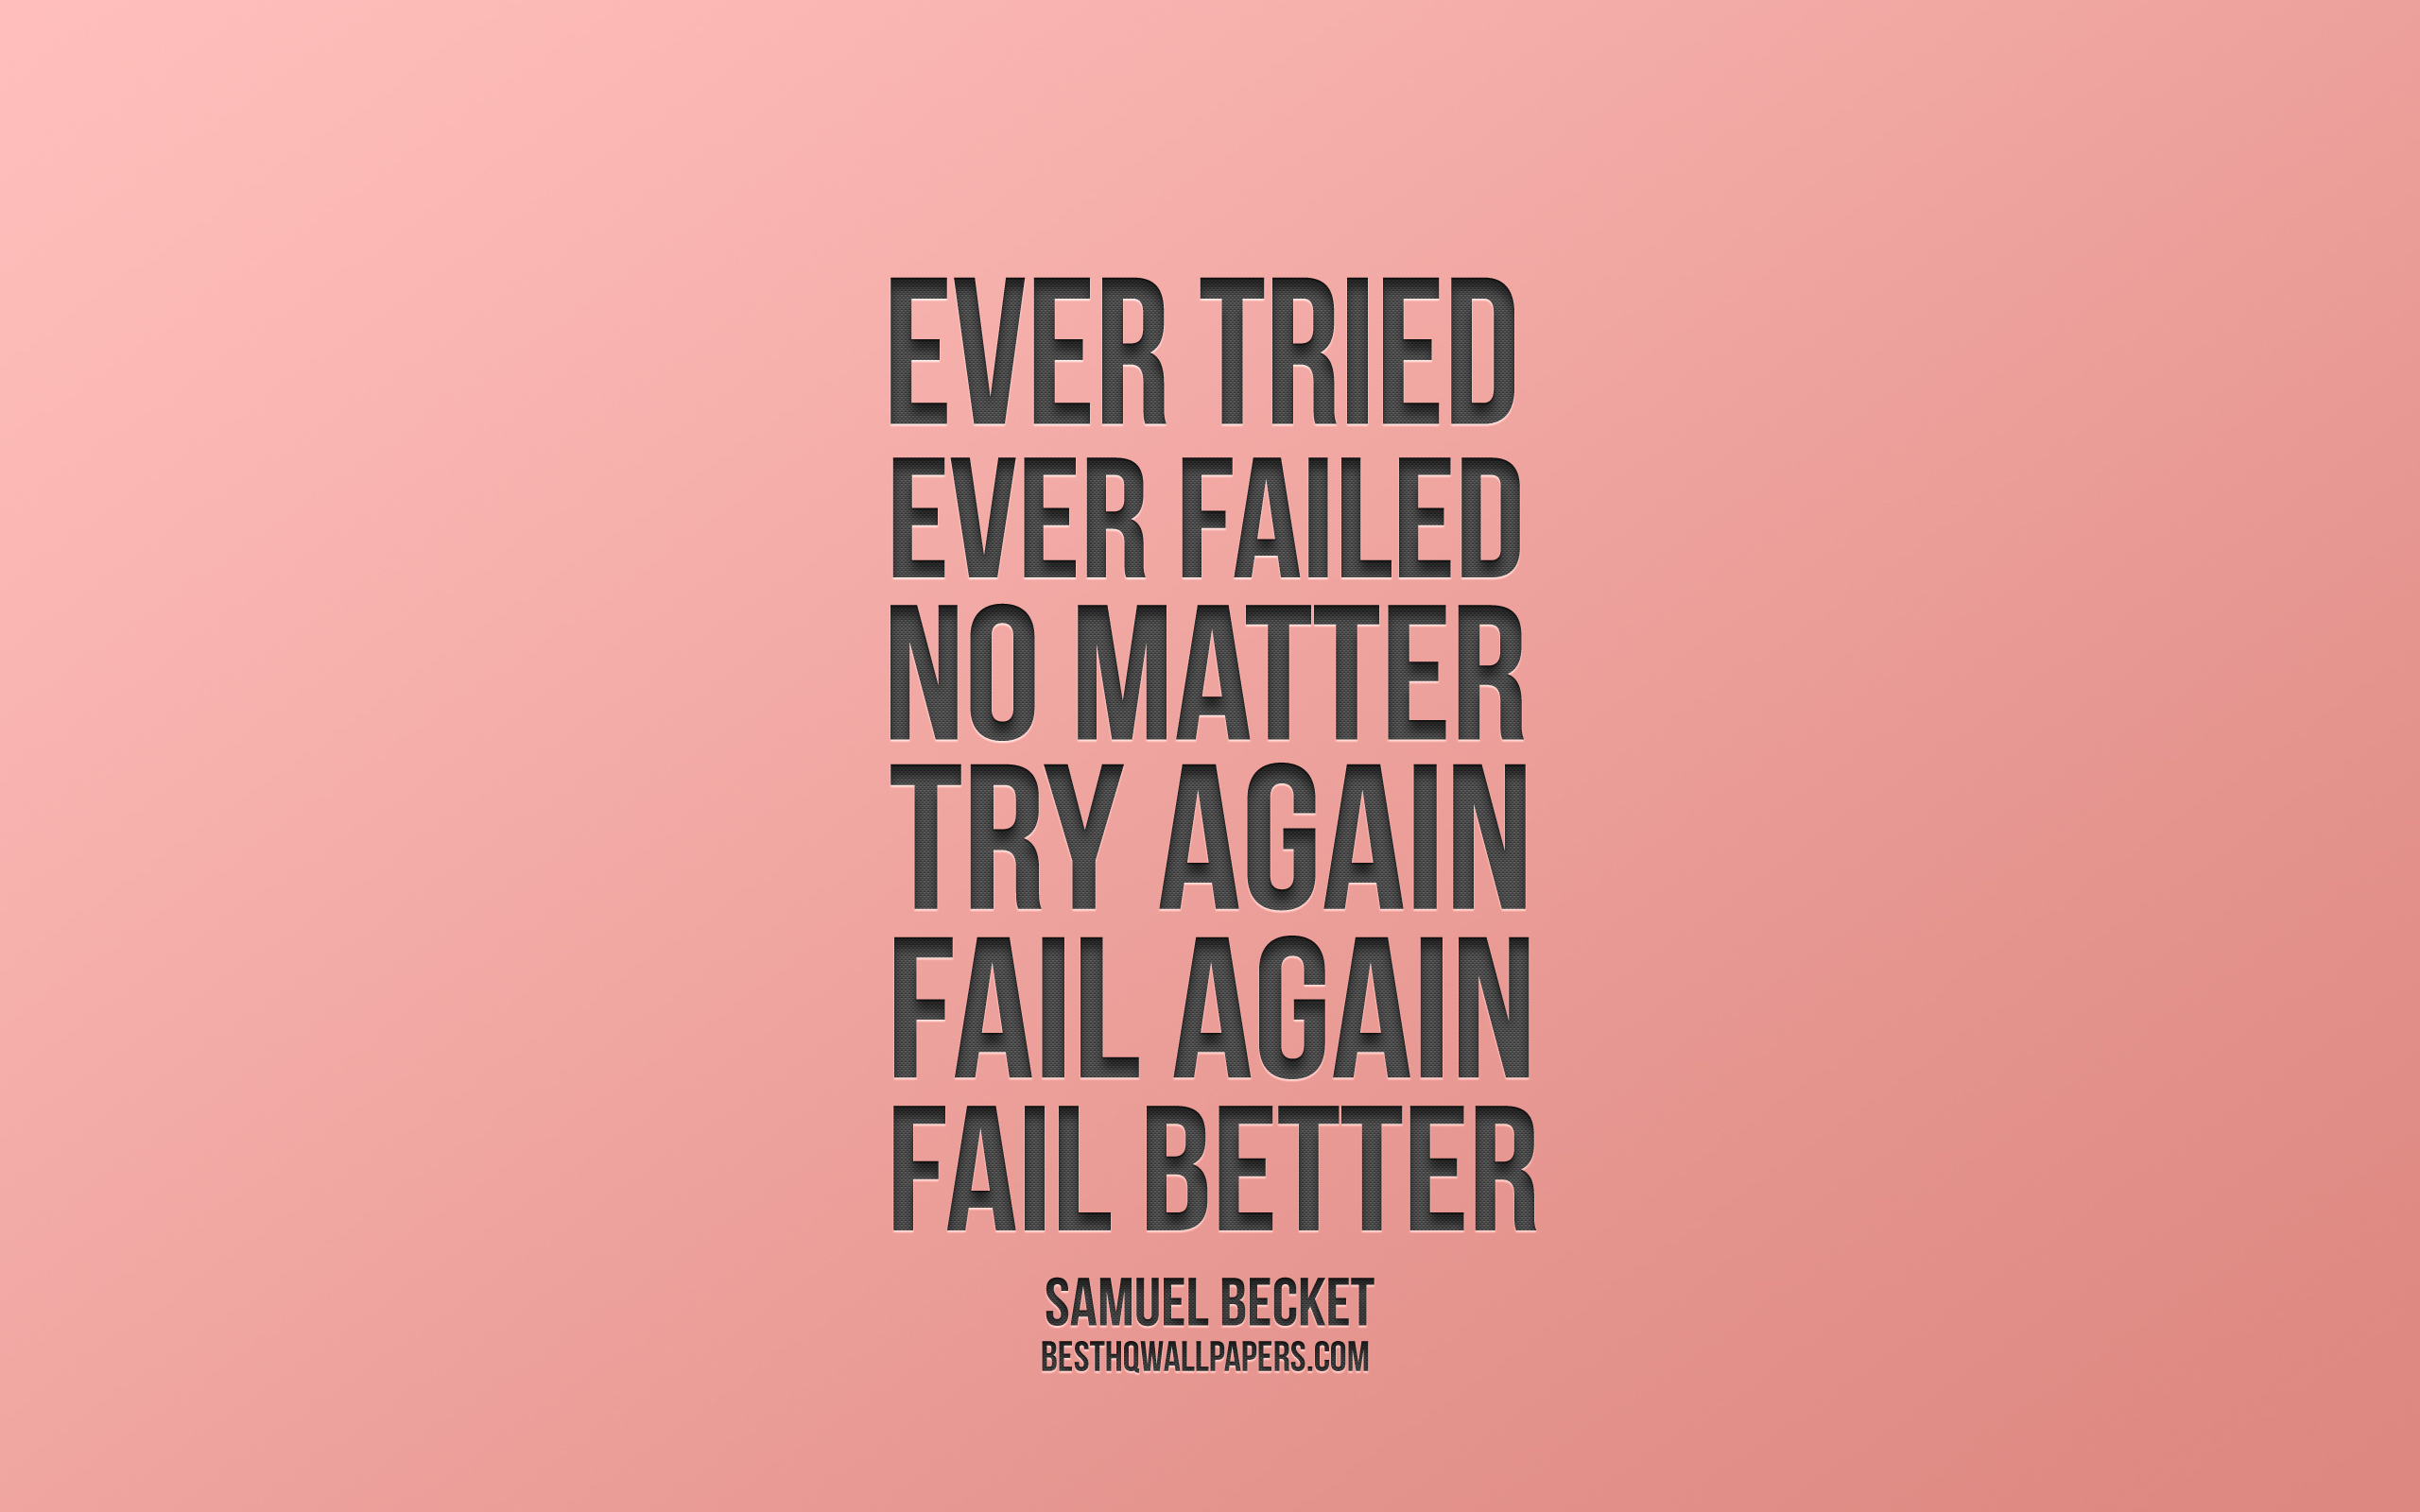 Download wallpaper Ever tried Ever failed No matter Try Again Fail again Fail better, Samuel Beckett quotes, pink background, popular quotes, minimalism art for desktop with resolution 2560x1600. High Quality HD picture